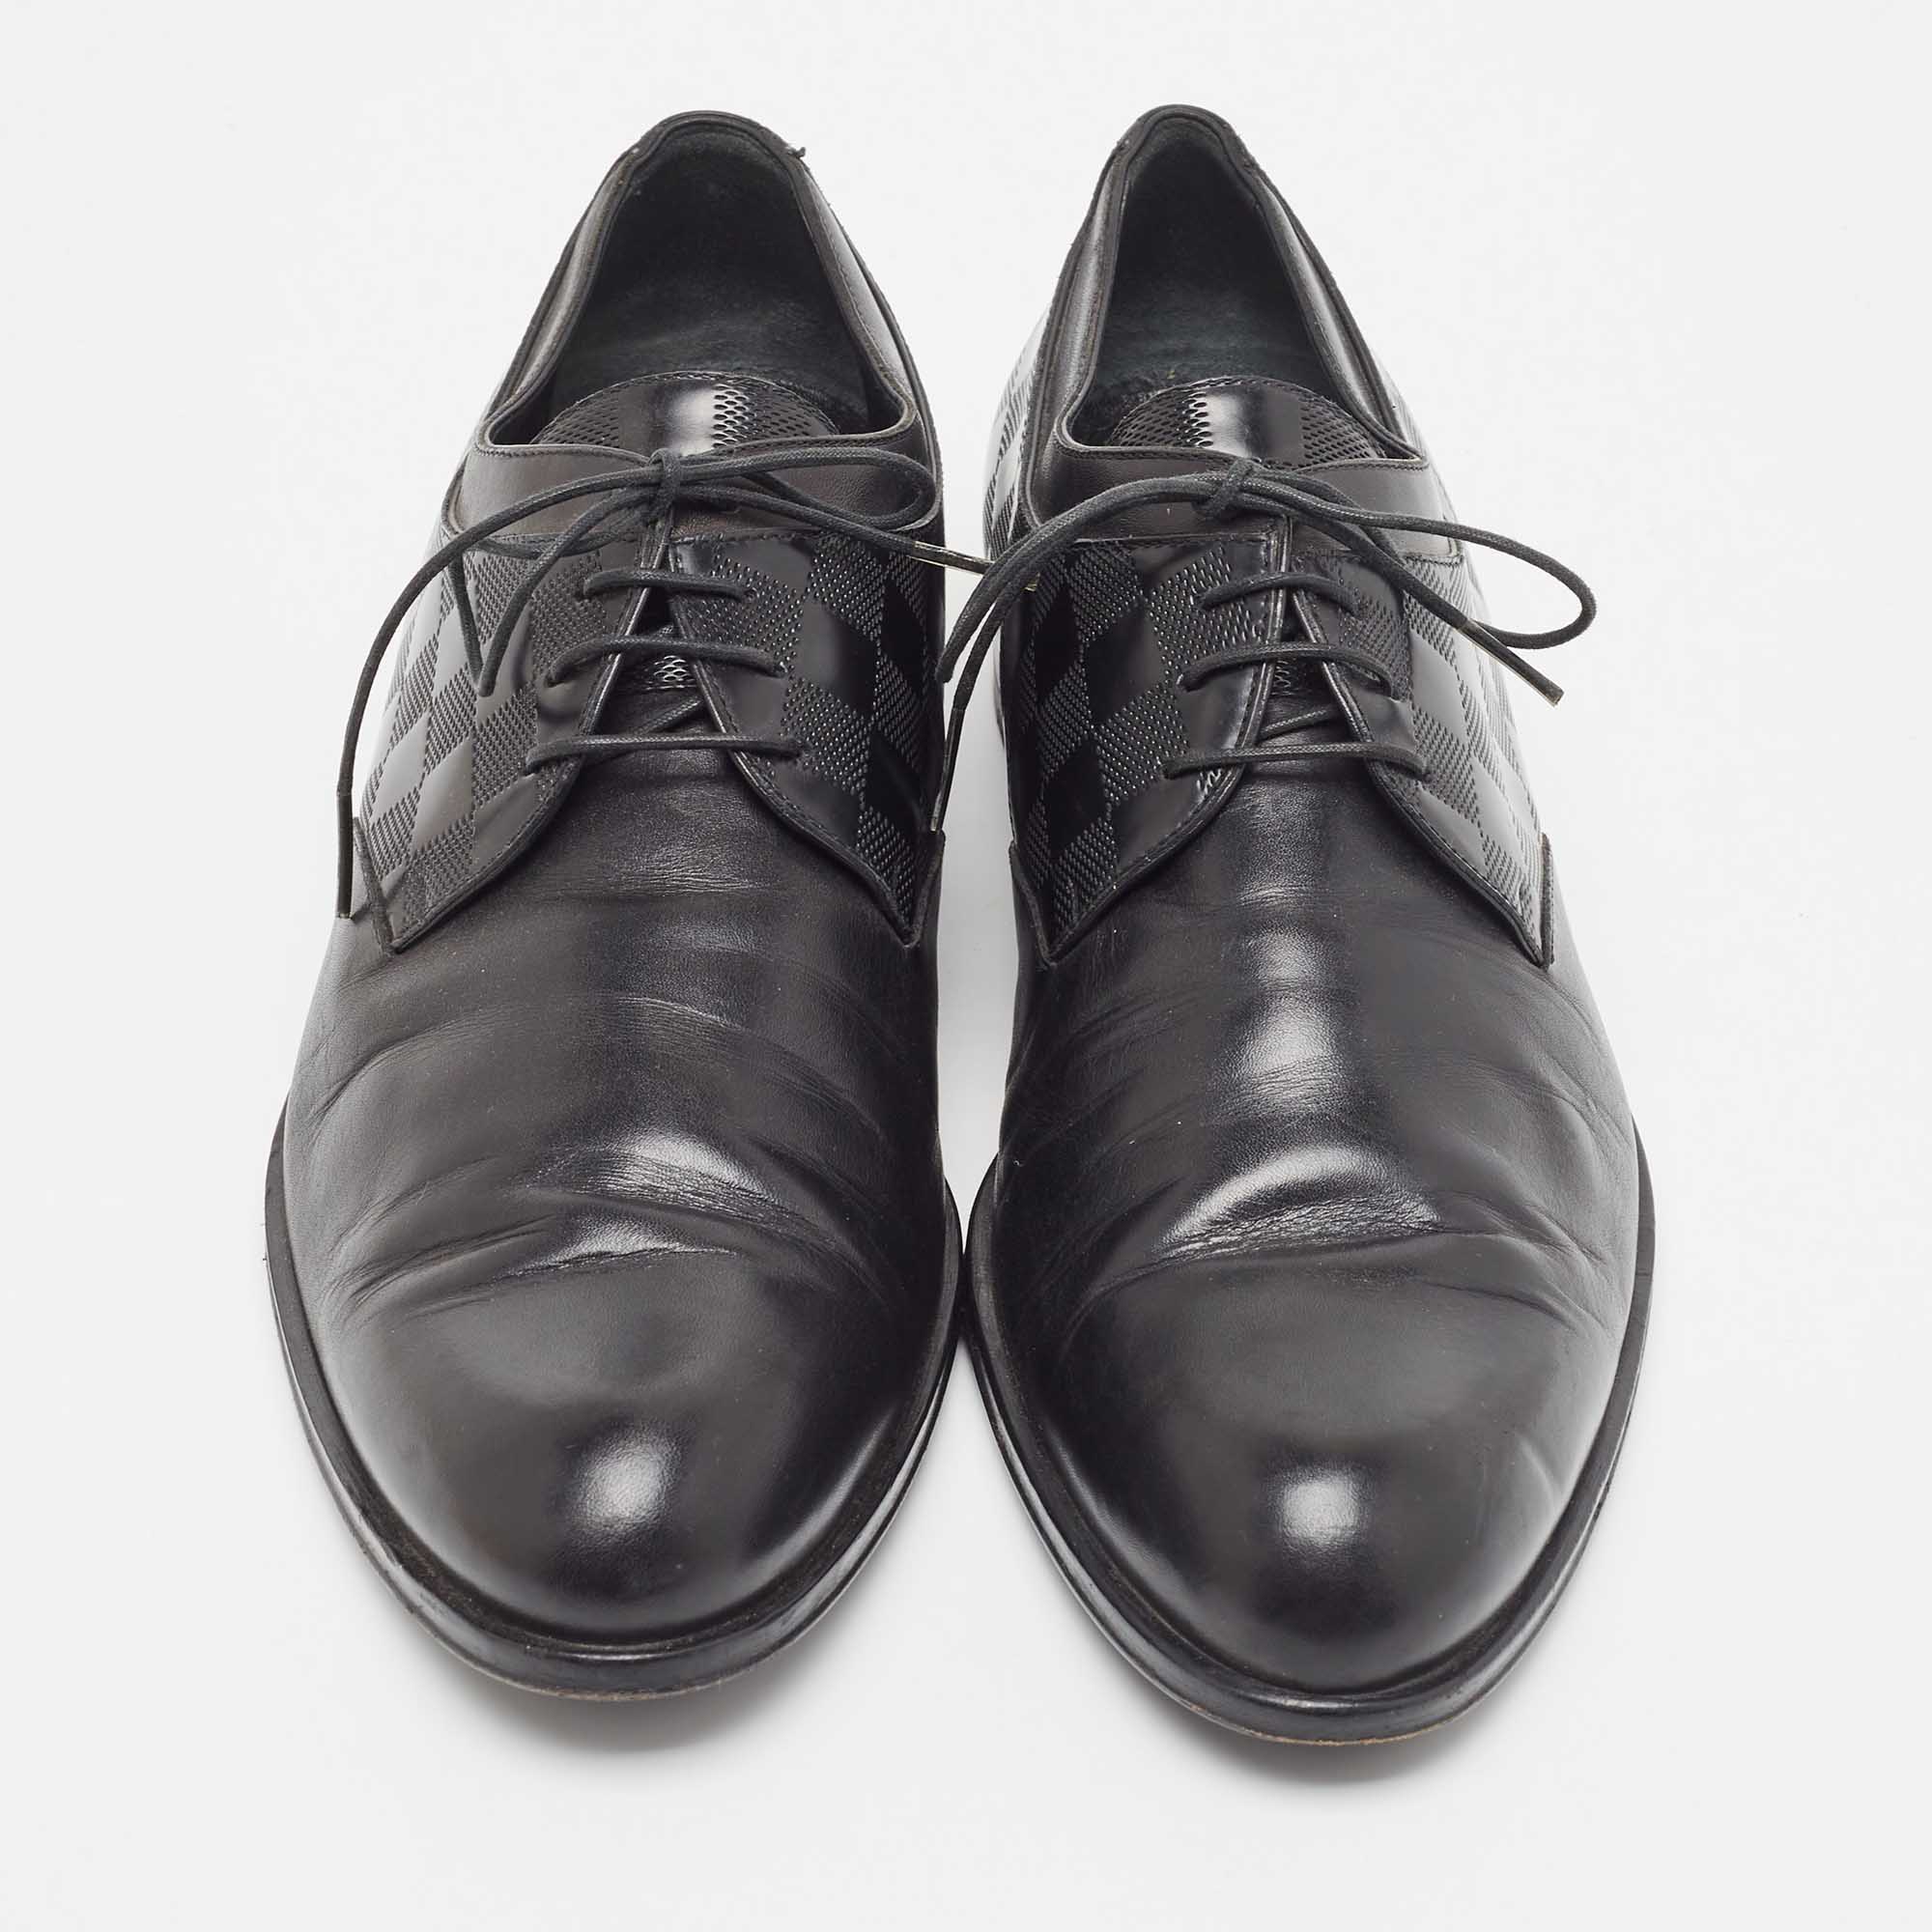 Louis Vuitton Black Damier Embossed Leather Lace Up Oxford Size 43